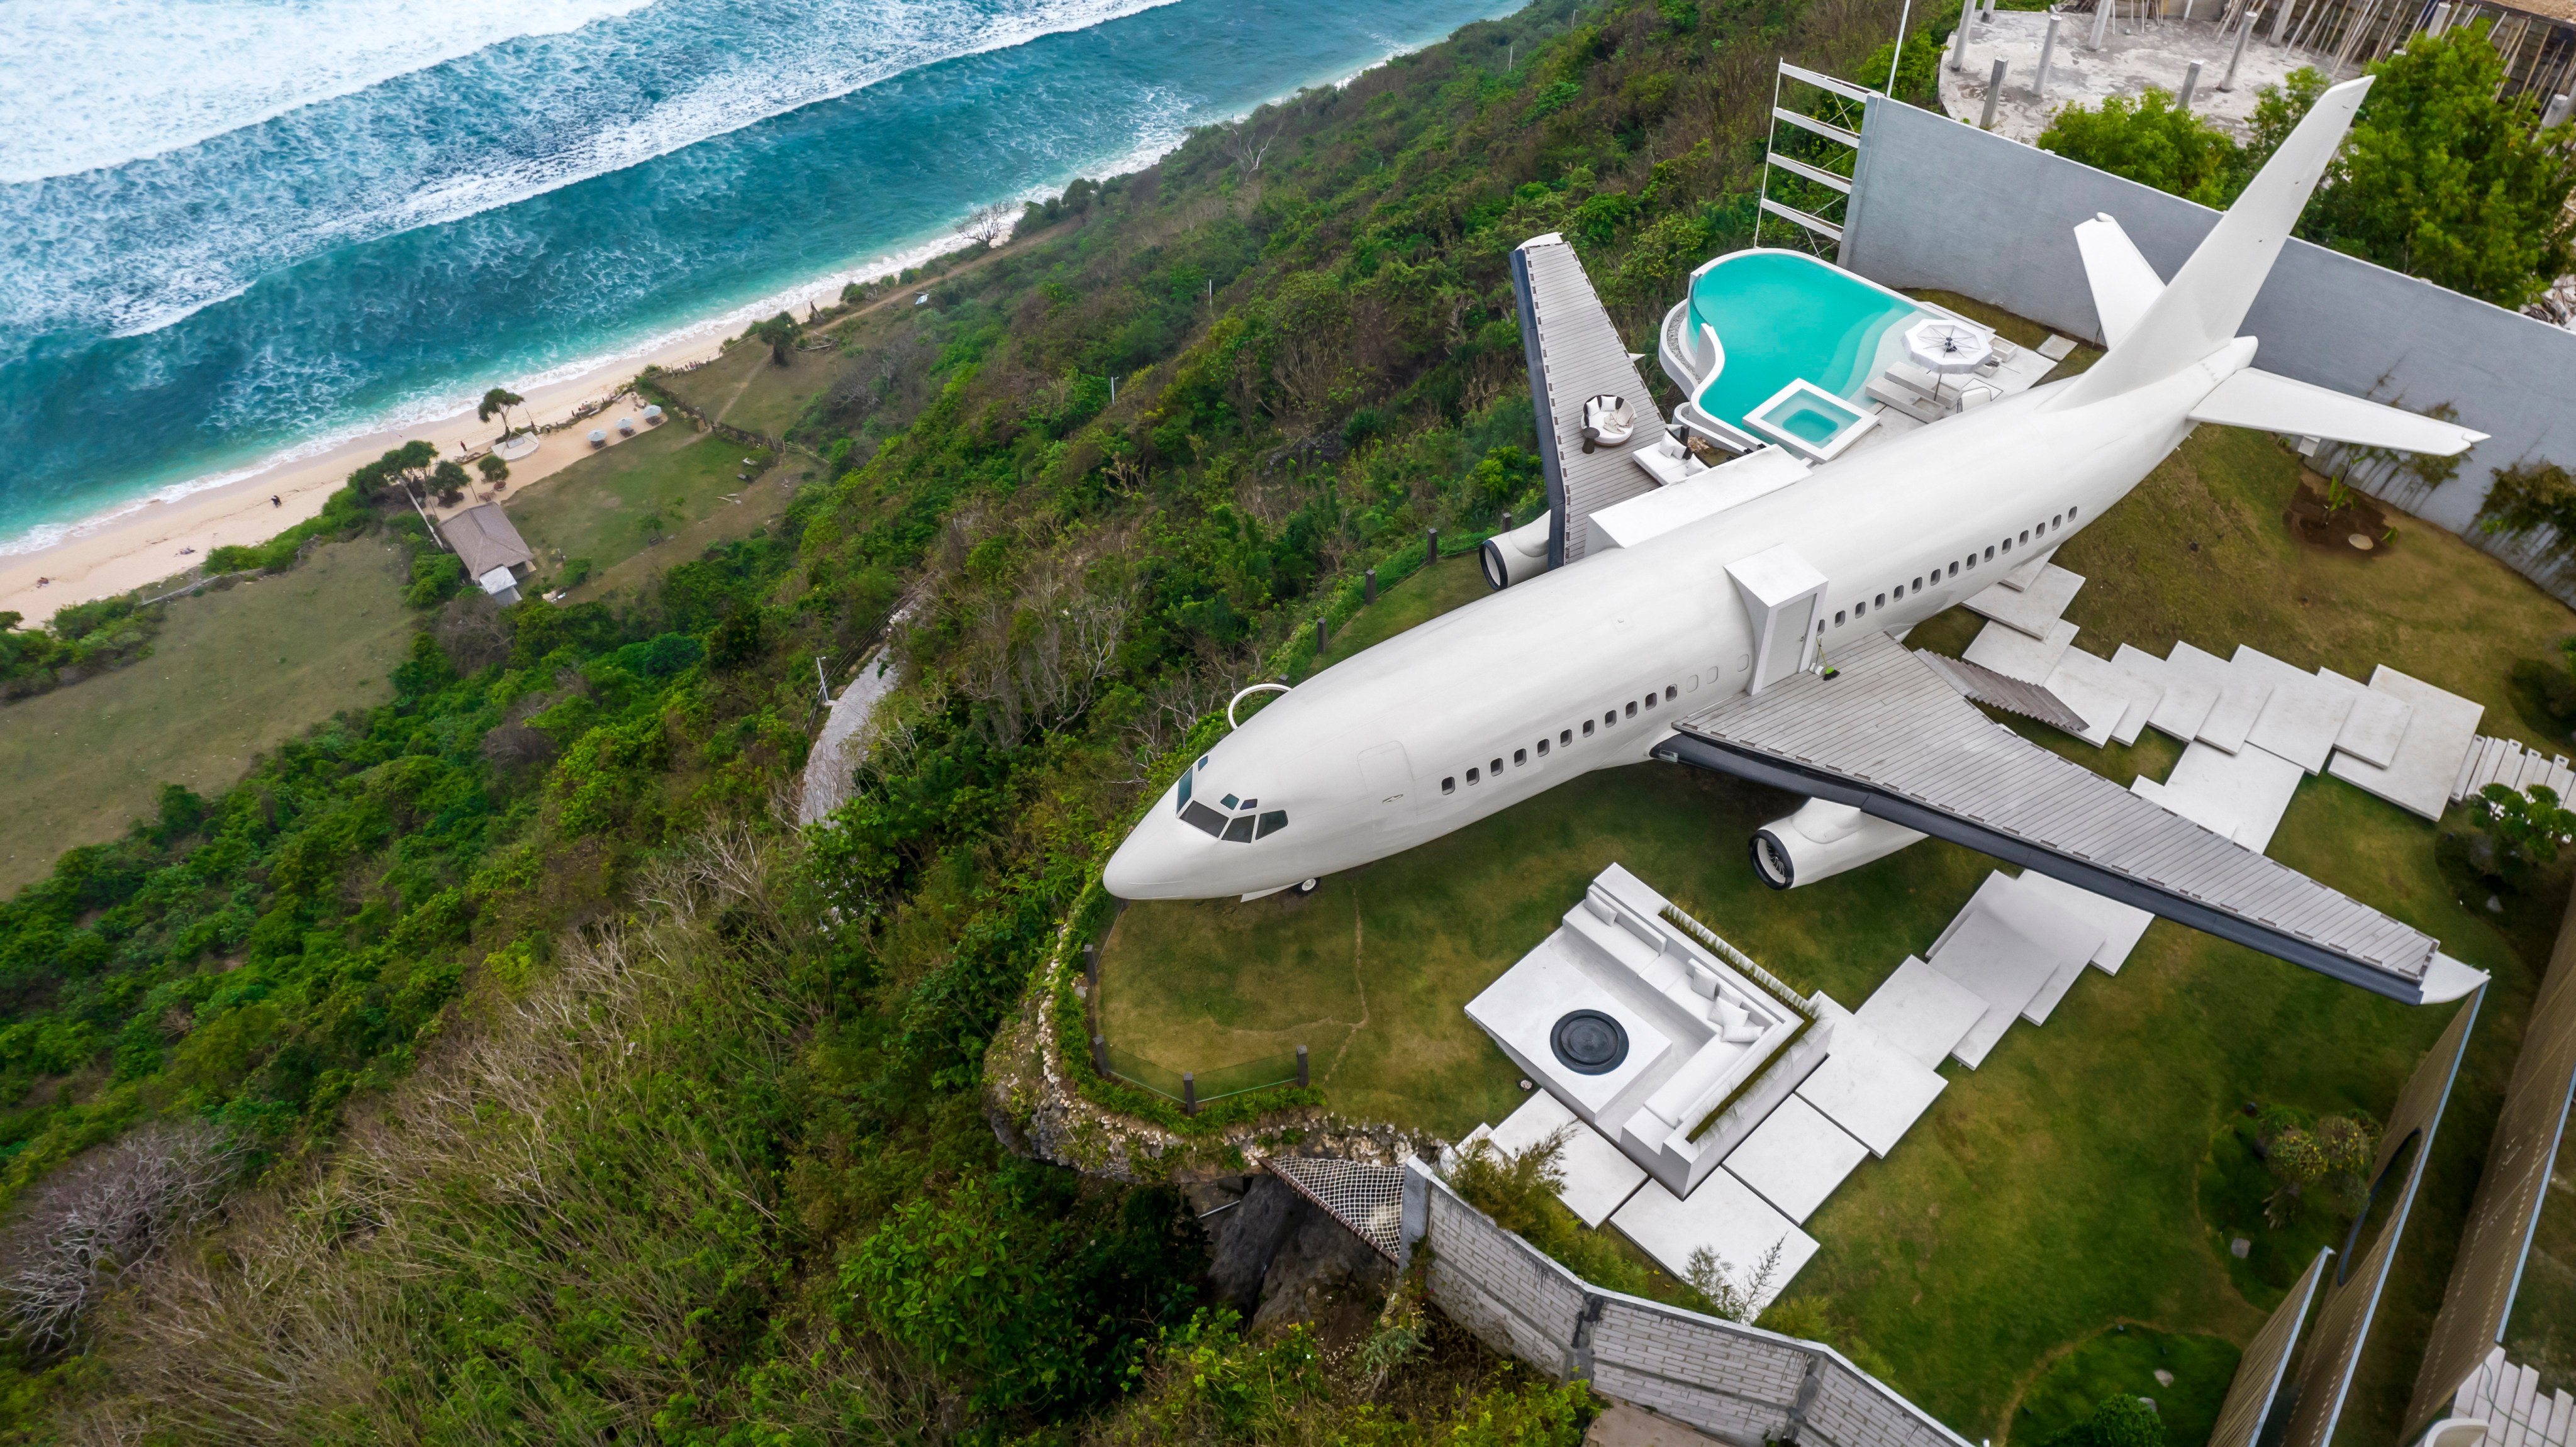 Russian property developer Felix Demin’s Private Jet Villa, built in a retired Boeing 737-200 and overlooking Nyang Nyang Beach, on Bali’s south coast, Indonesia, is one of the world’s most unique residences. Photo: Felix Demin